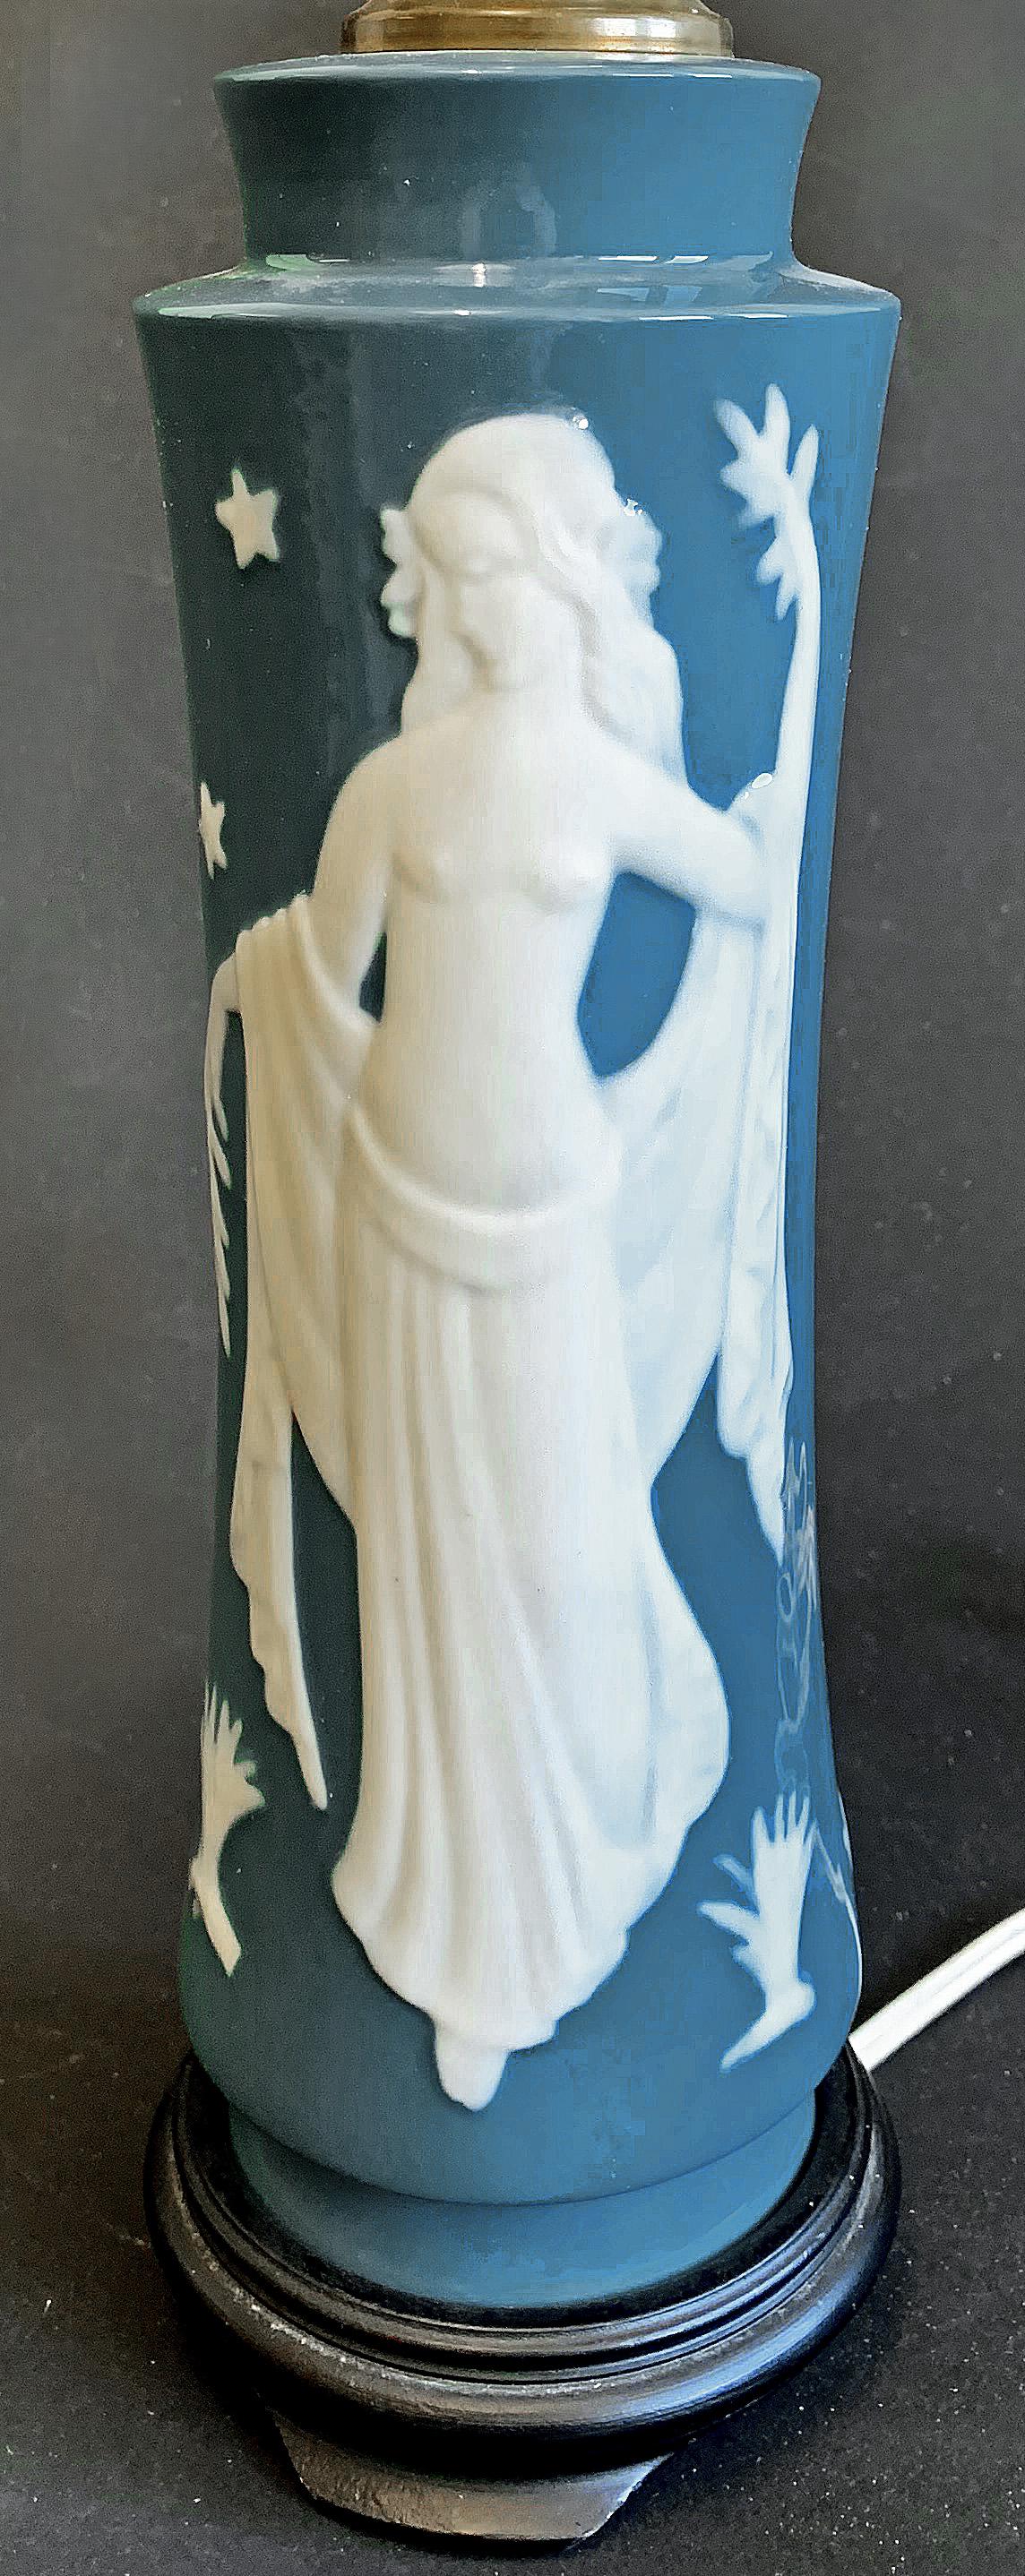 Beautifully sculpted and crafted in porcelain, in shades of white and slate blue, this rare and lovely table lamp depicts Persephone, goddess of spring, in bas relief. The lamp was made by the famous Lenox porcelain company in Trenton, New Jersey,